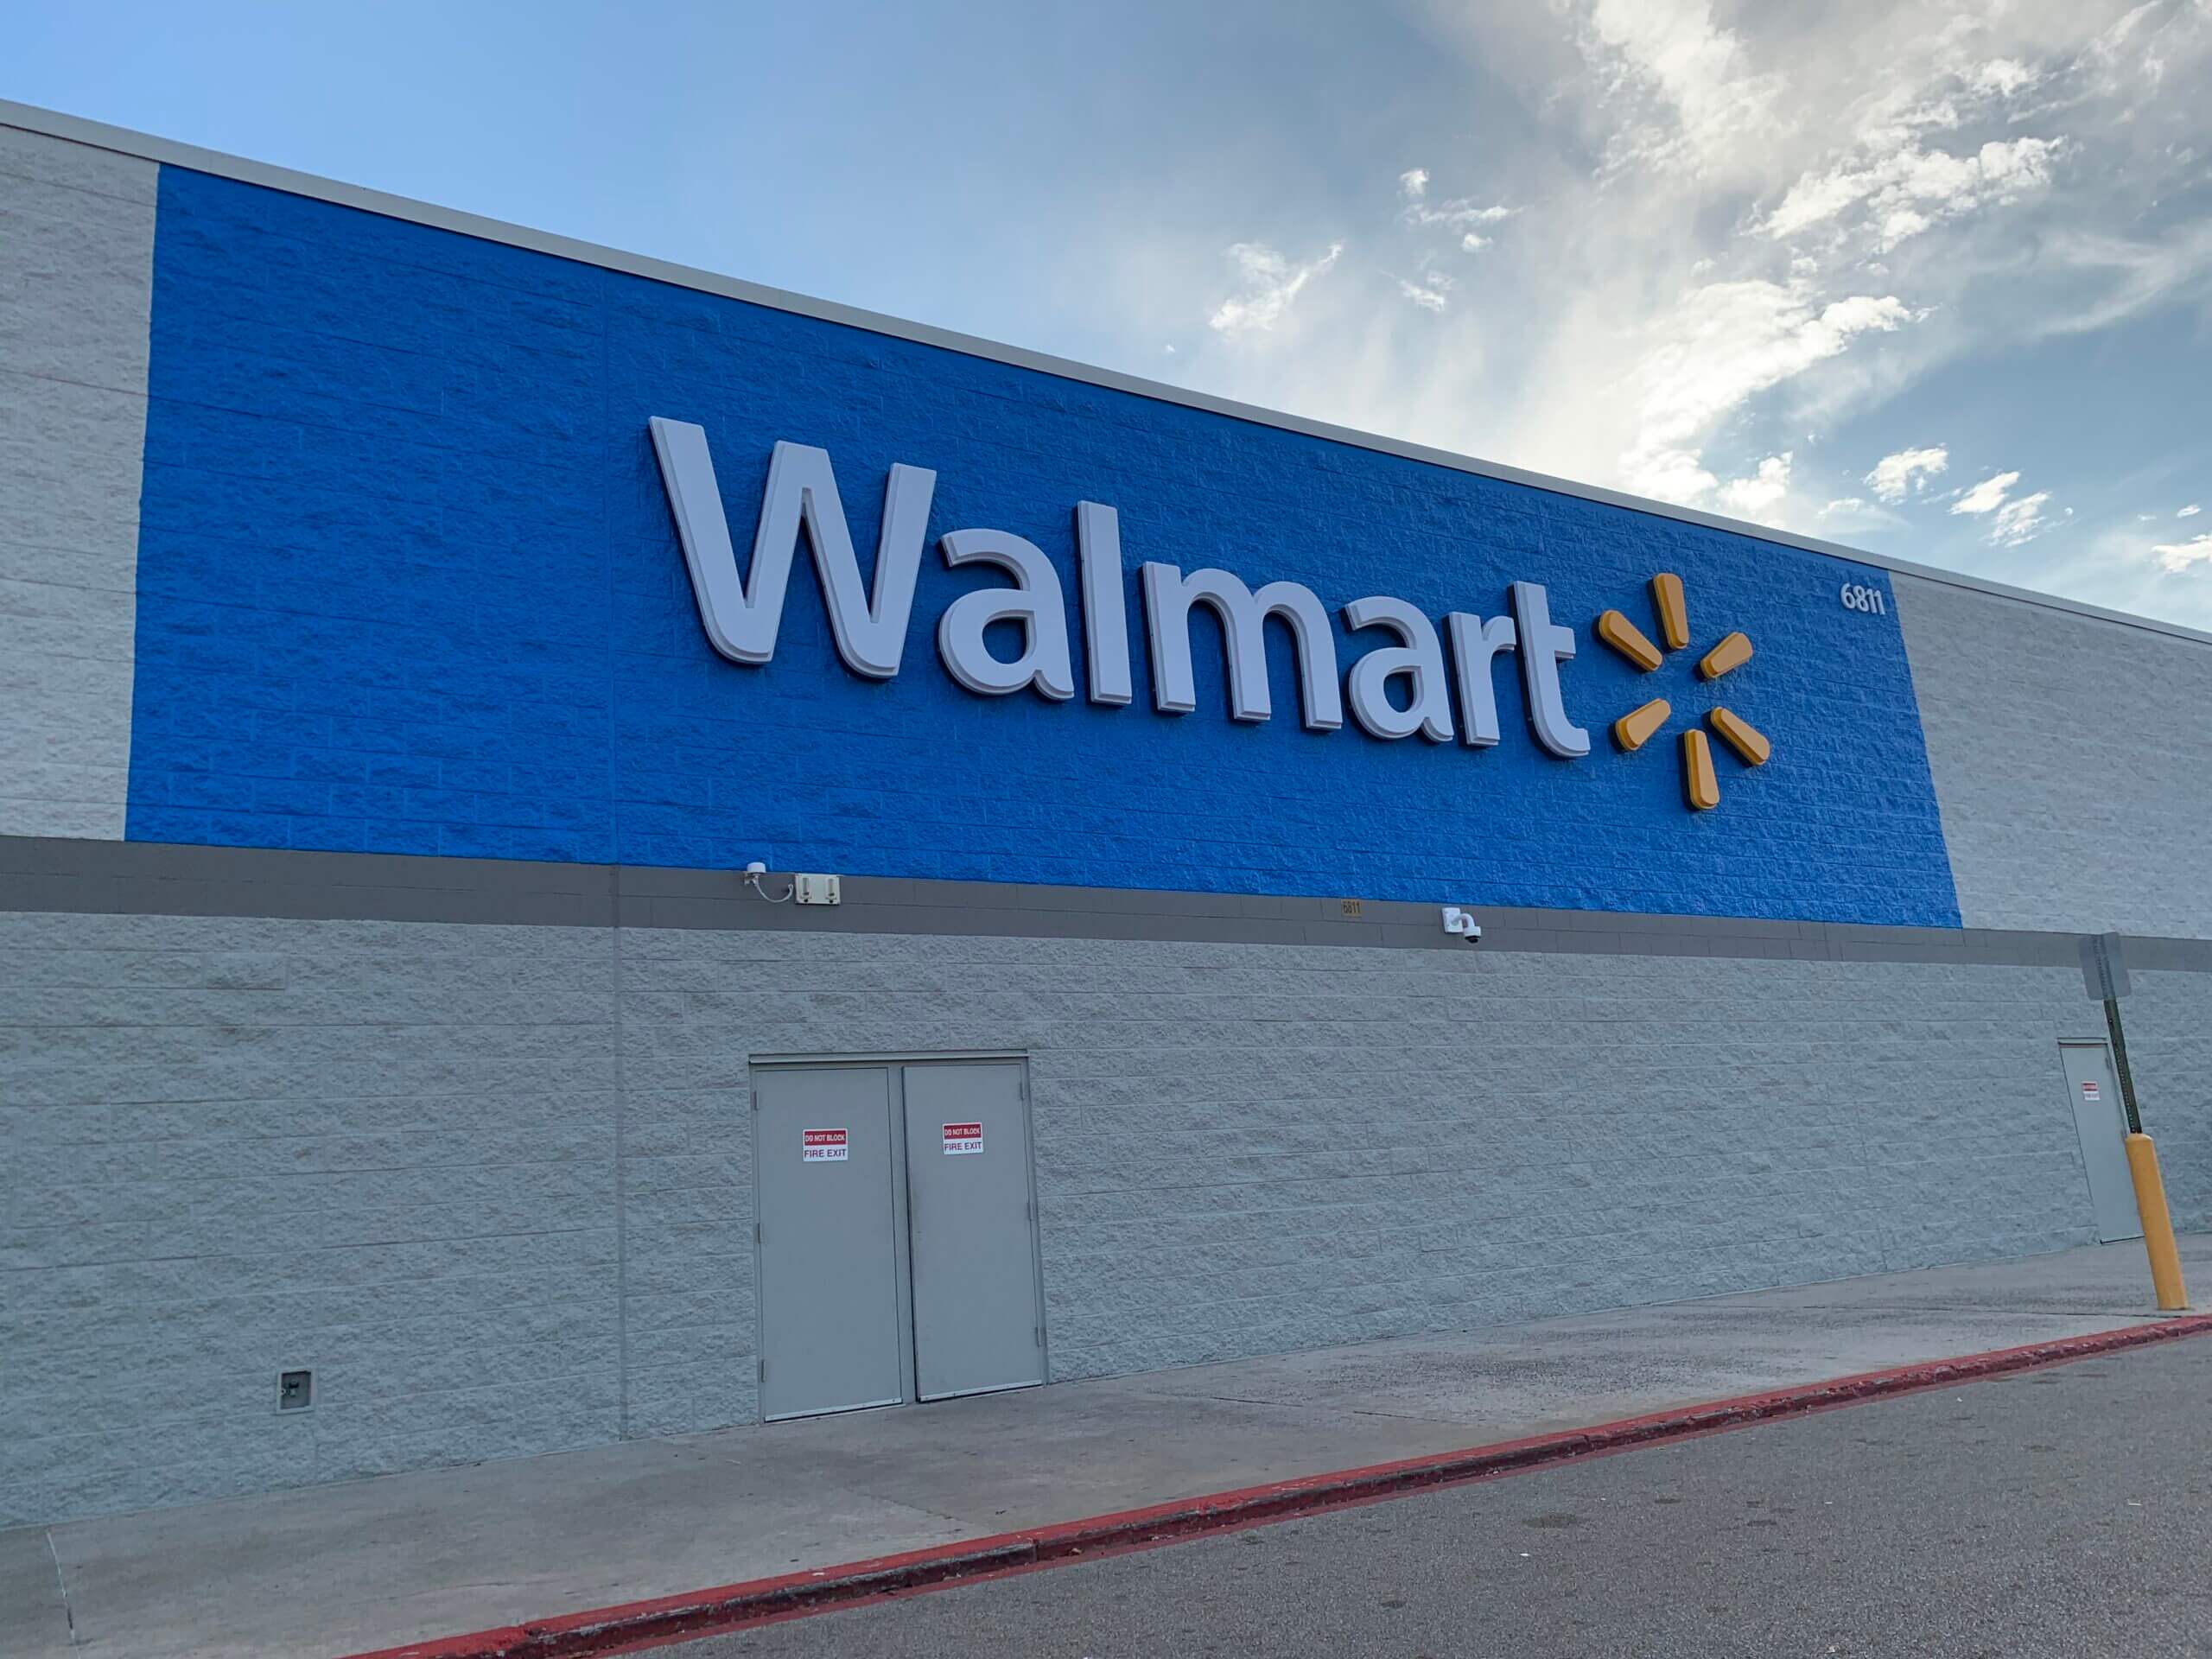 Walmart truck drivers to earn more pay